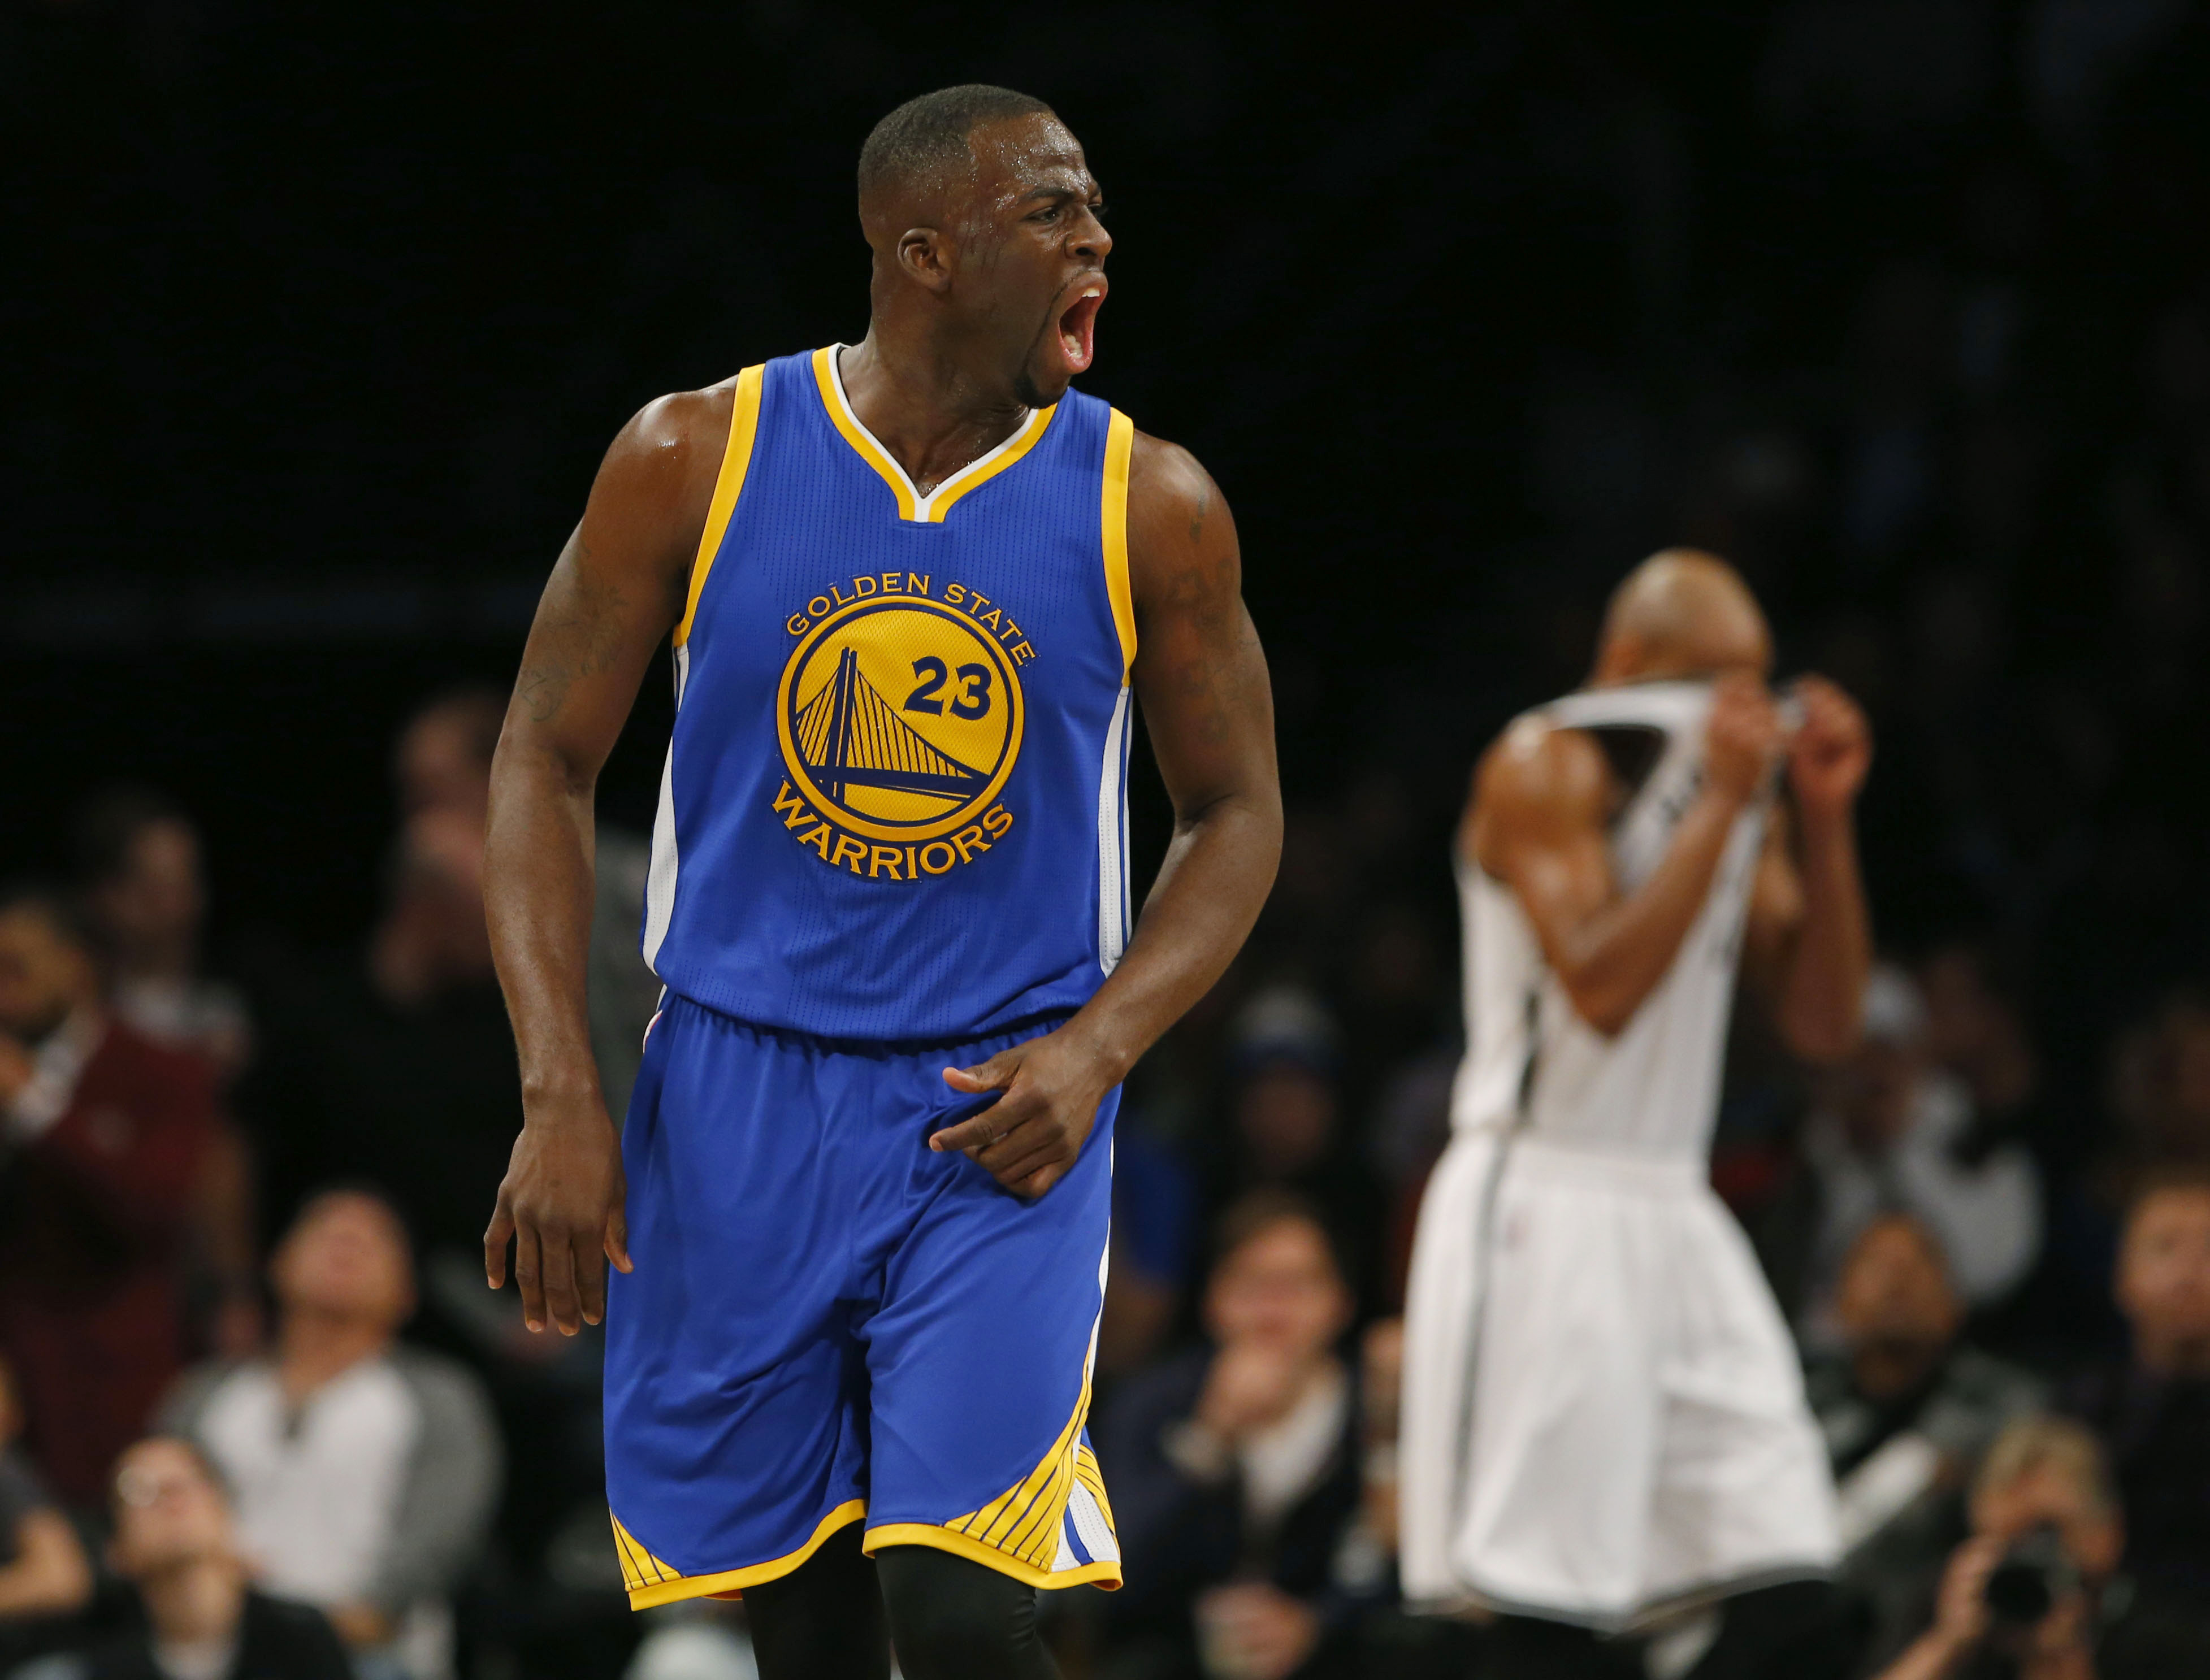 Draymond Green talks trash just like his mother taught him to.